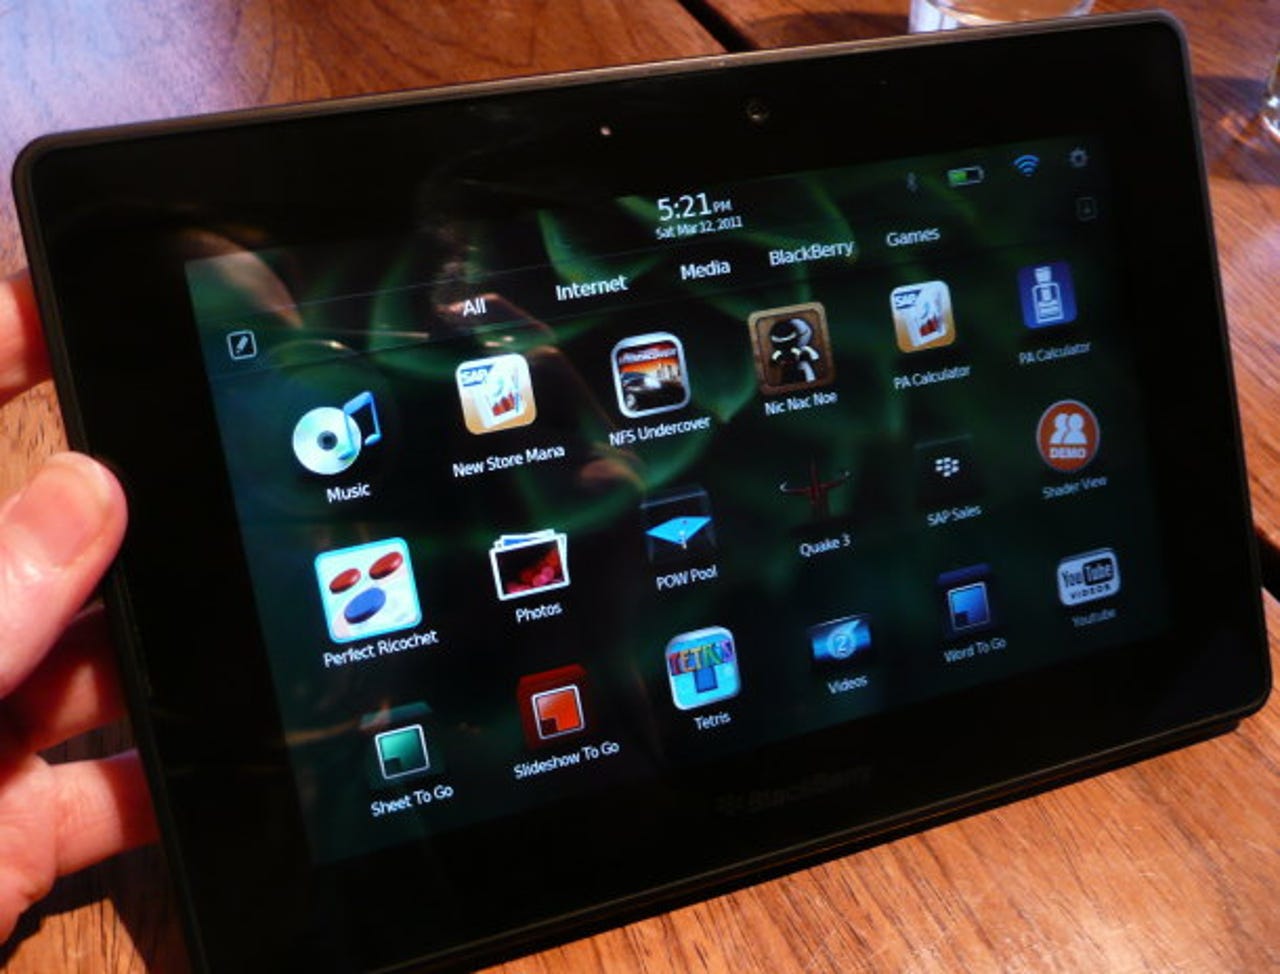 BlackBerry PlayBook to run Android apps